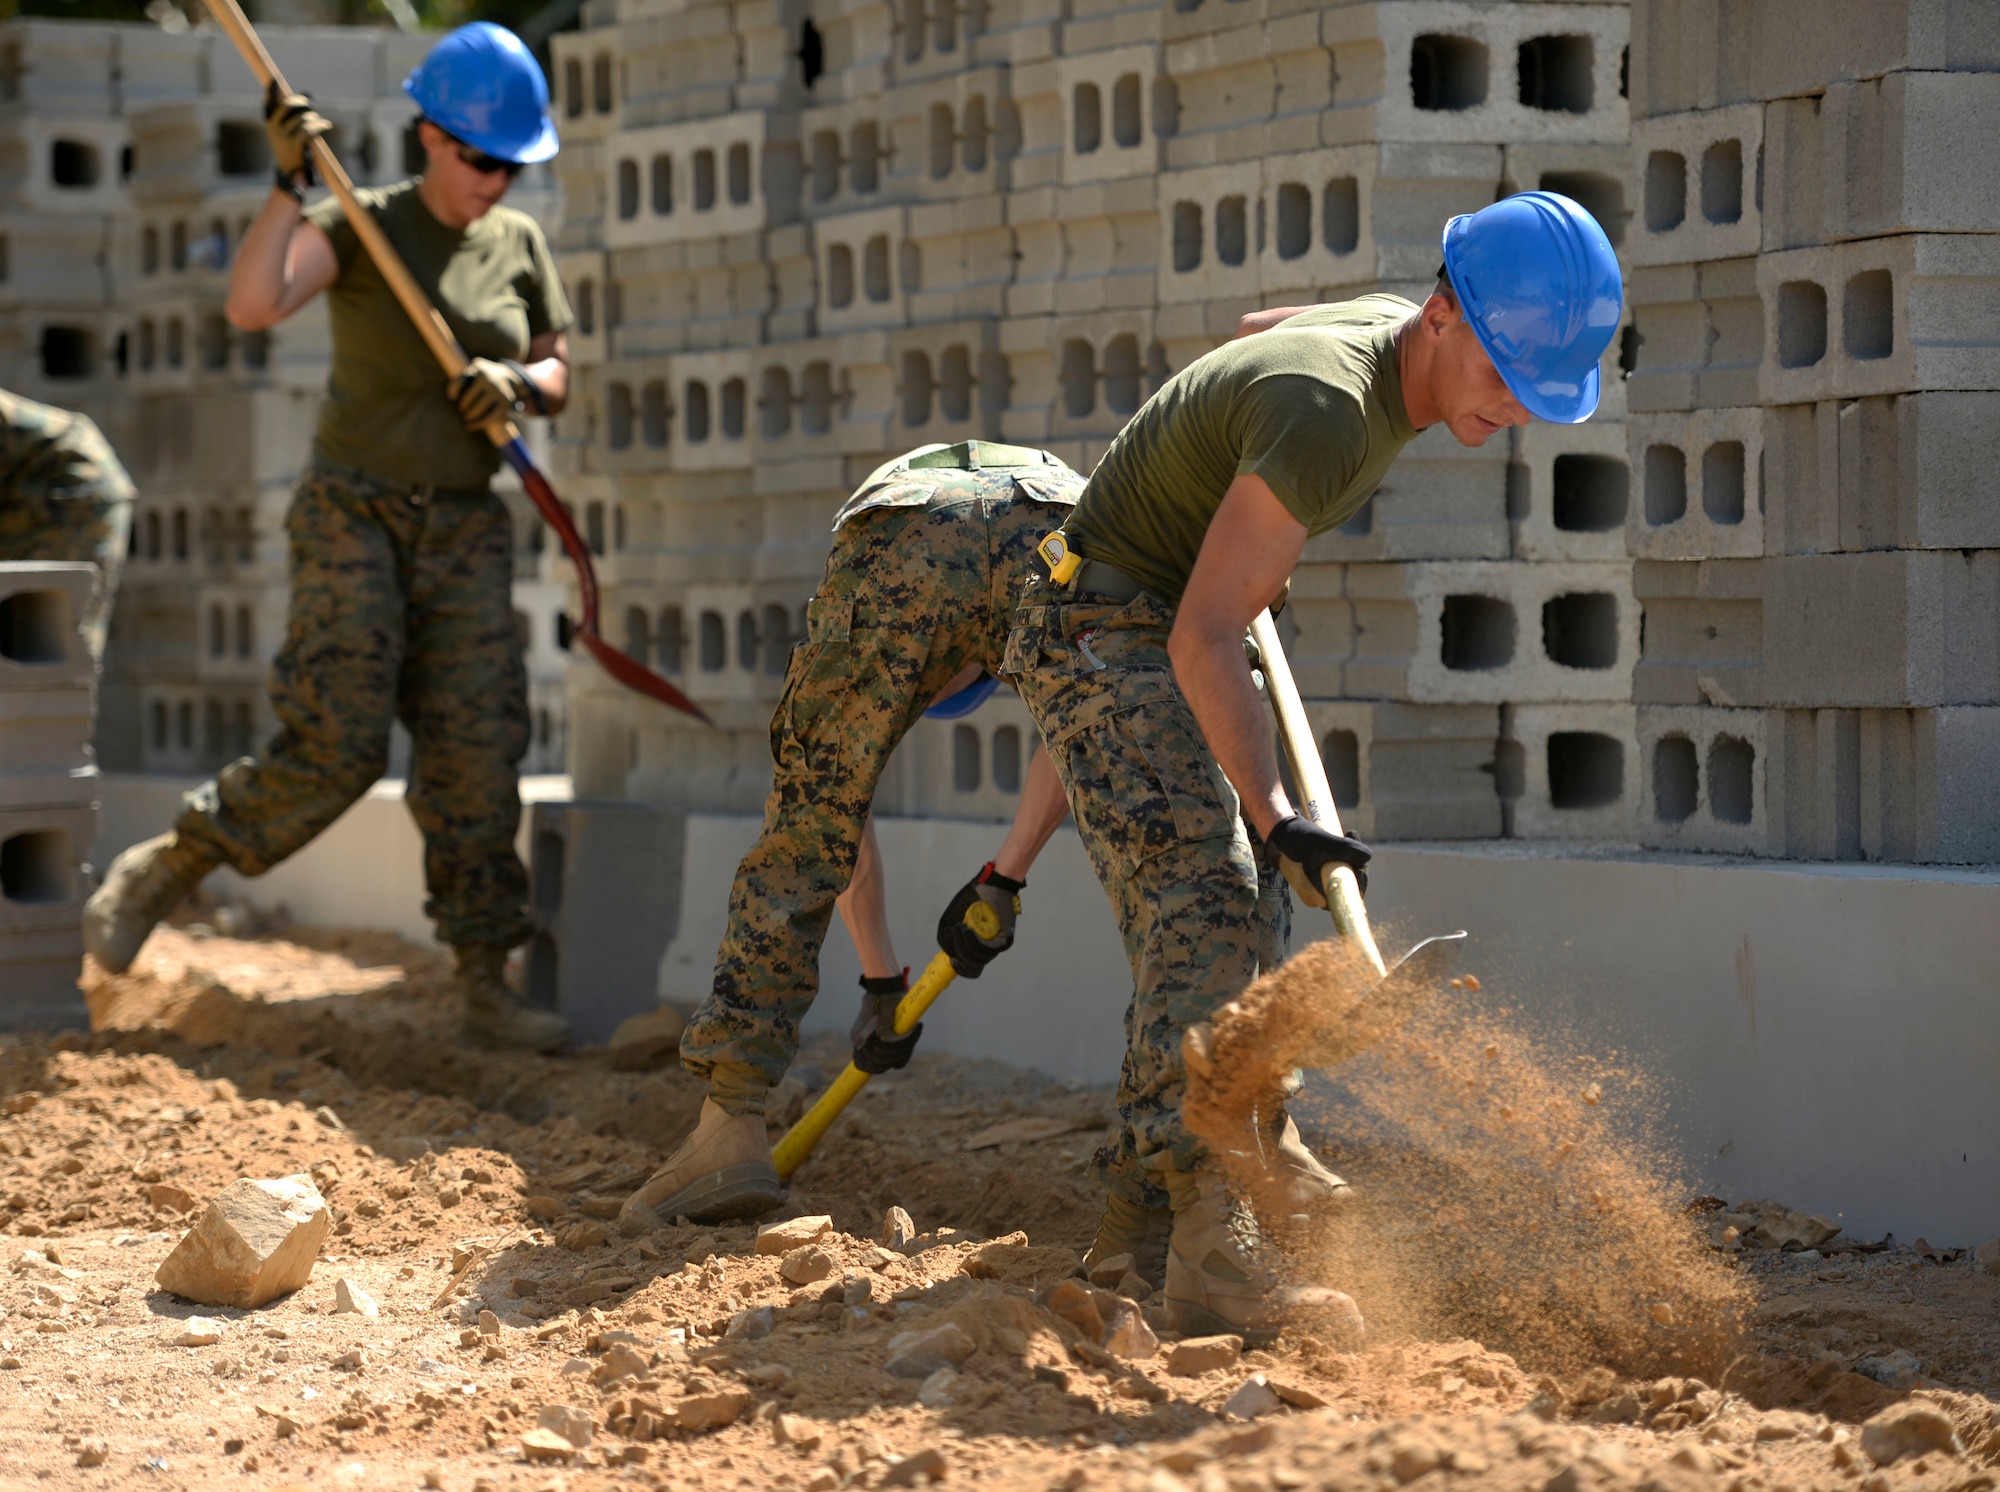 Marines from 271st Marine Wing Support Squadron, 2nd Marine Air Wing, out of Marine Corps Air Station Cherry Point, N.C., dig a trench for electrical wire around the exterior of the new school building being constructed at Gabriela Mistral primary school in Ocotoes Alto, Honduras, June 1, 2015. The Marines will be working with their Air Force counterparts from the 823rd Expeditionary RED HORSE Squadron out of Hurlburt Field, Fla., during exercise New Horizons Honduras 2015. New Horizons was launched in the 1980s and is an annual joint humanitarian assistance exercise that U.S. Southern Command conducts with a partner nation in Central America, South America or the Caribbean. The exercise improves joint training readiness of U.S. and partner nation civil engineers, medical professionals and support personnel through humanitarian assistance activities. (U.S. Air Force photo by Capt. David J. Murphy/Released)